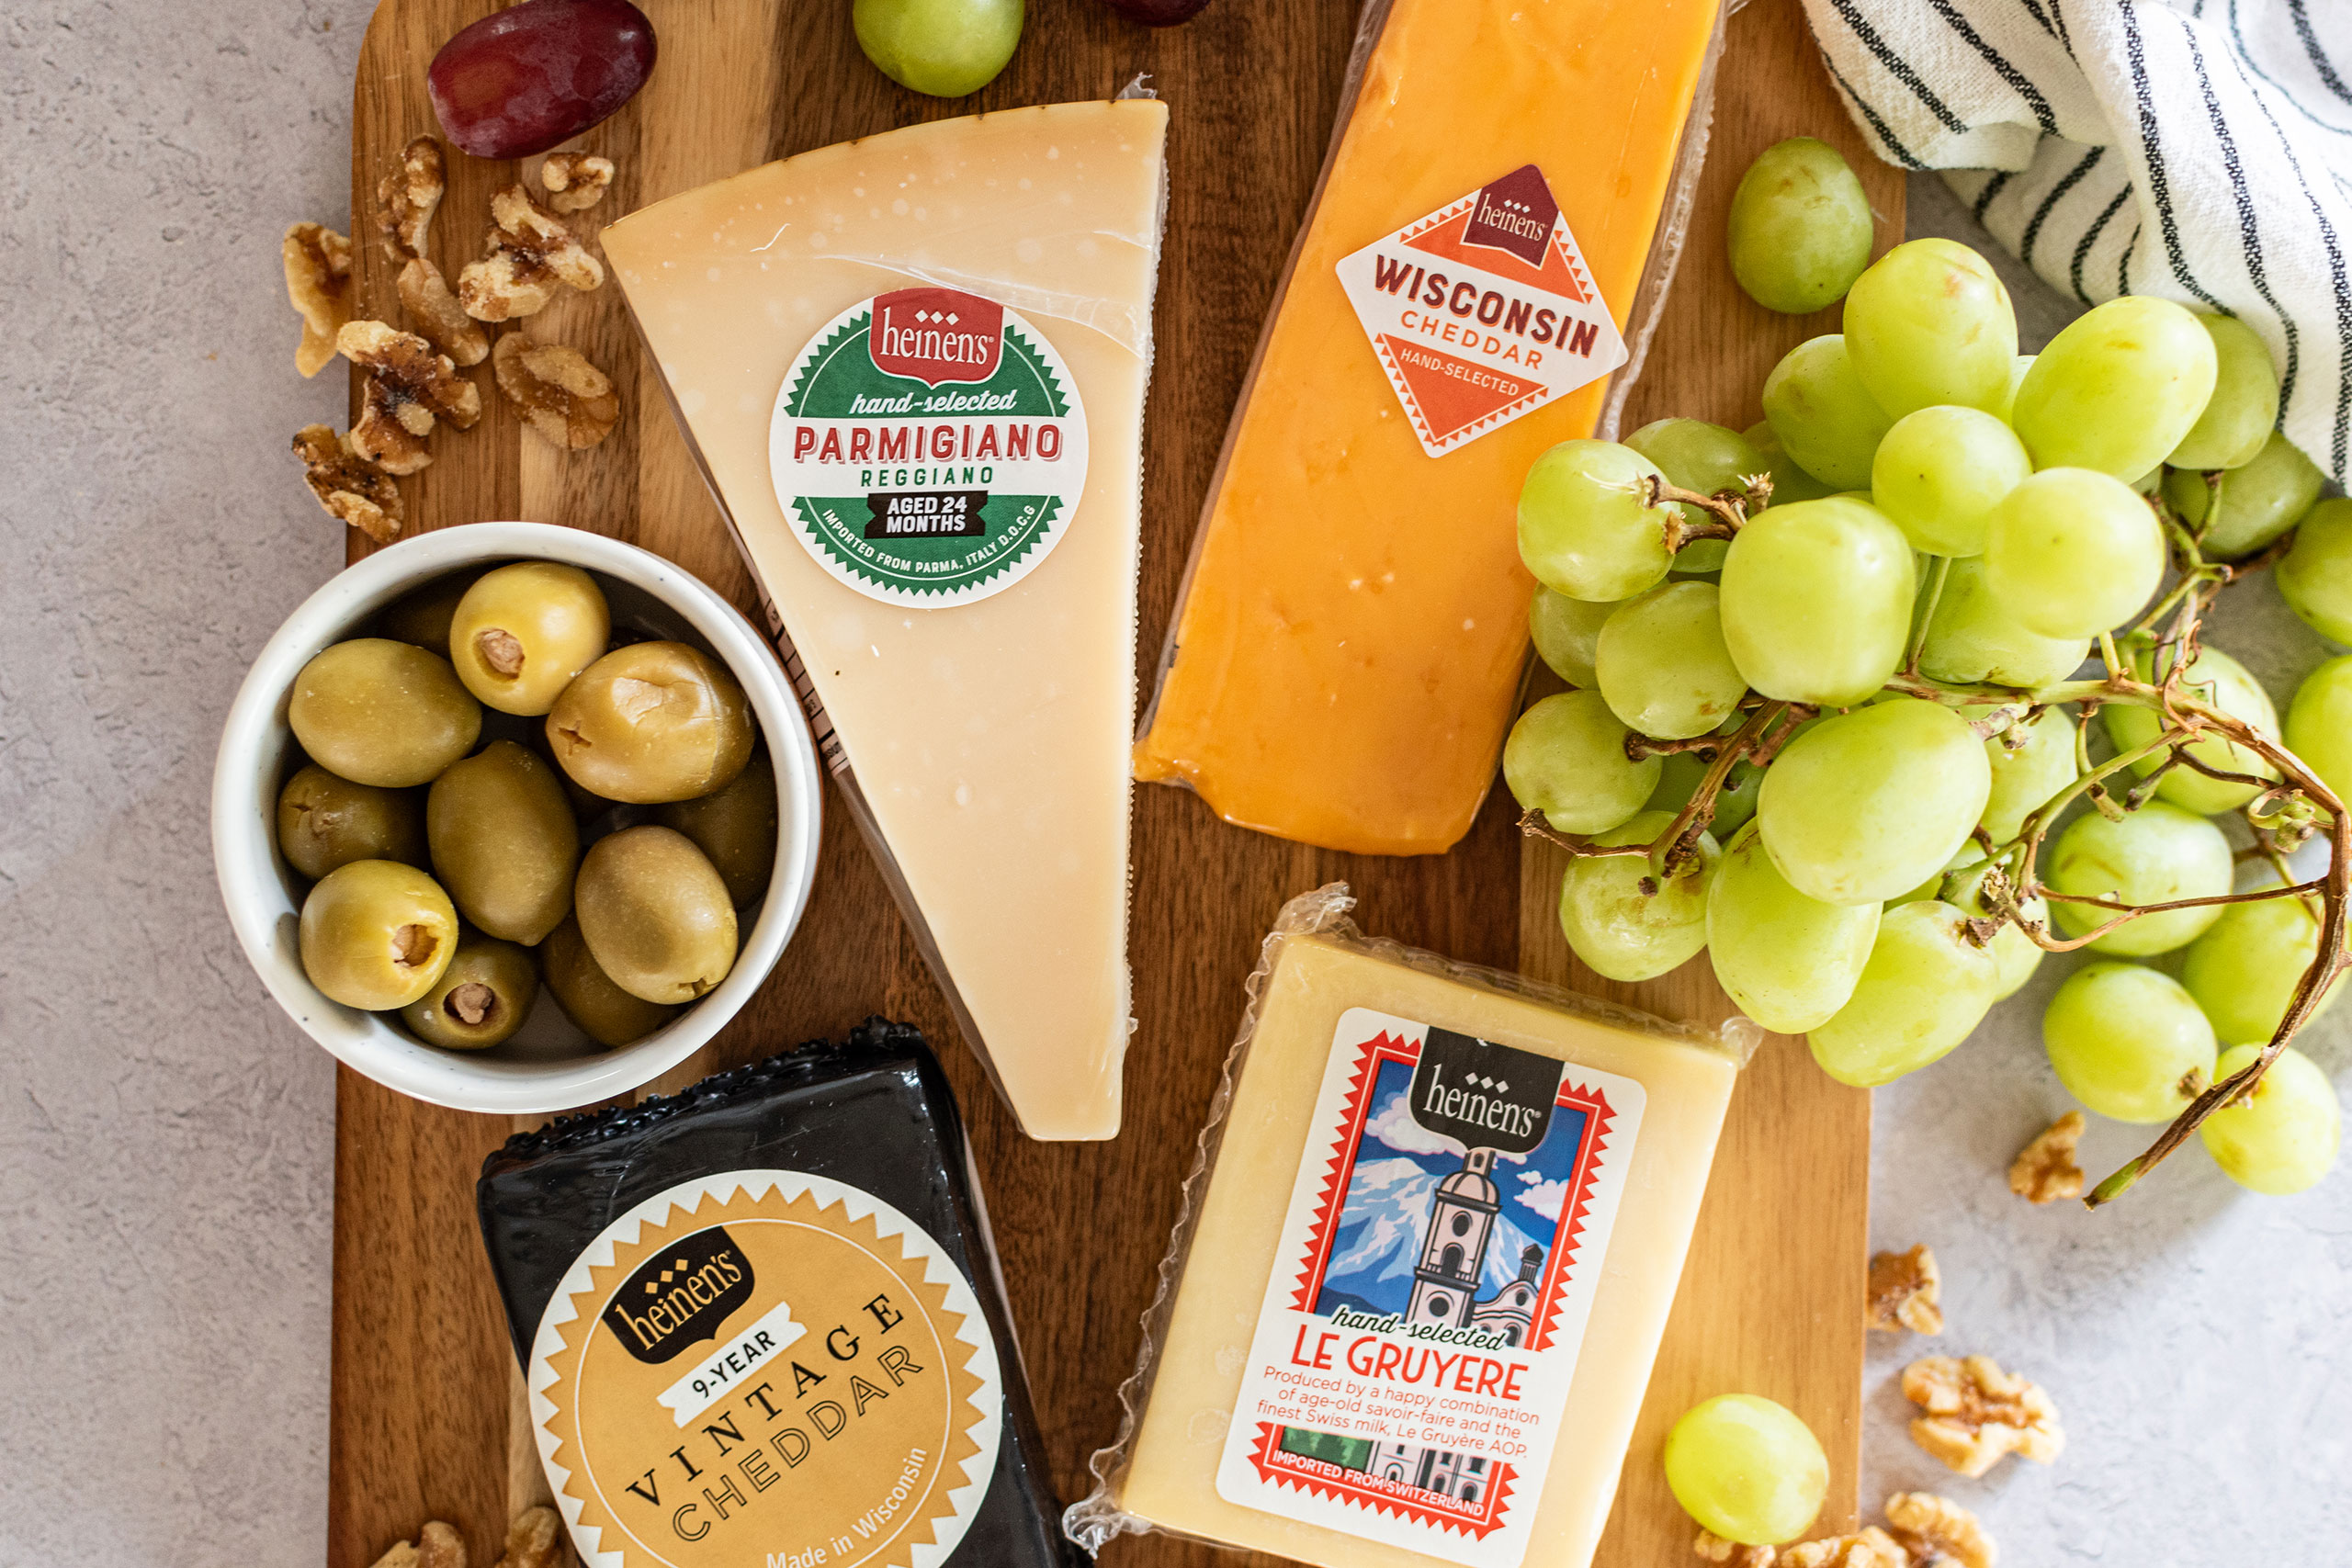 We Know Our Sources: Heinen's Hand-Selected Cheeses